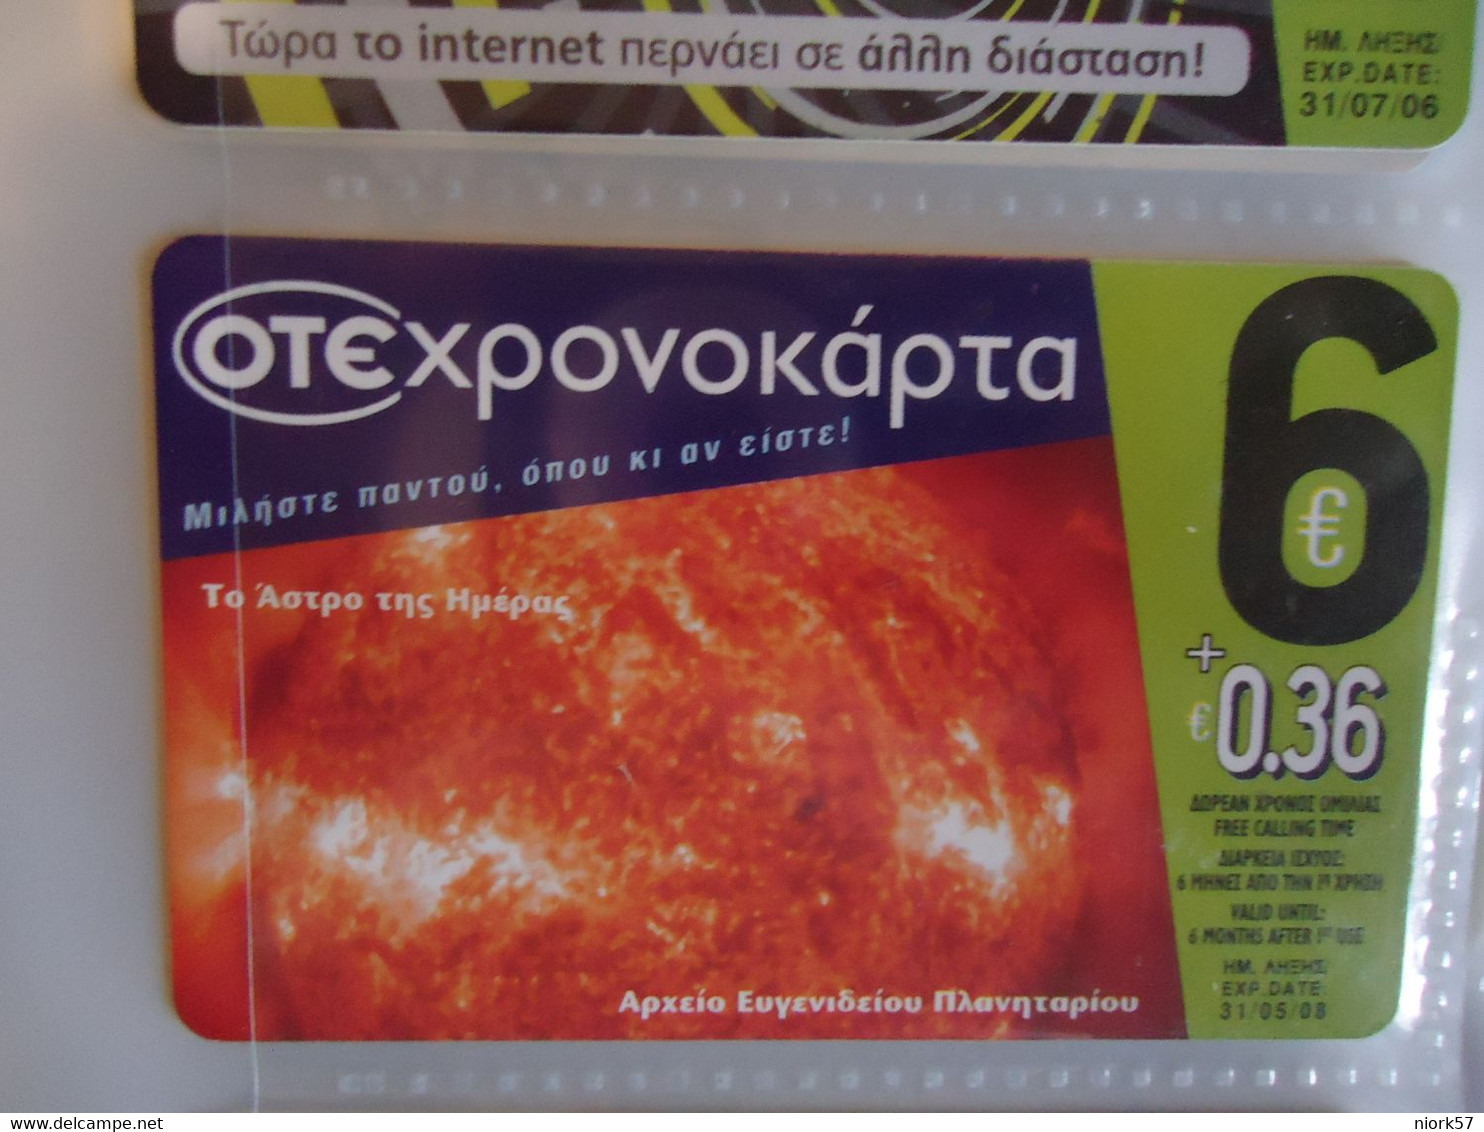 GREECE USED PREPAID CARDS  SPACE PLANET - Espace